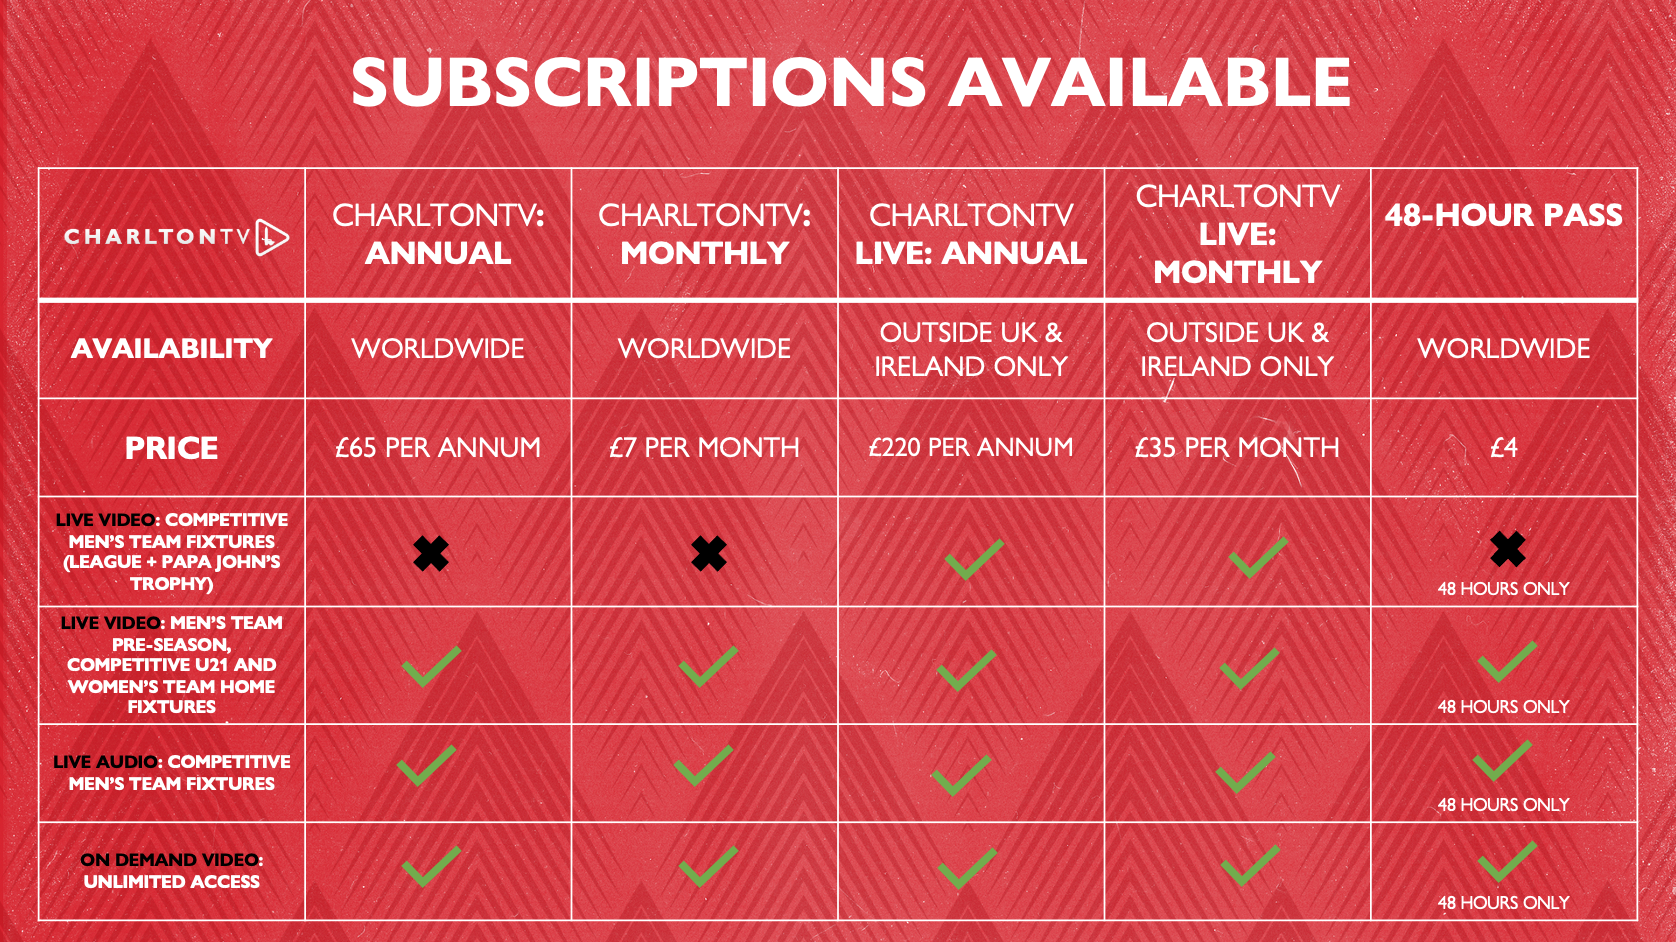 CharltonTV's available subscriptions